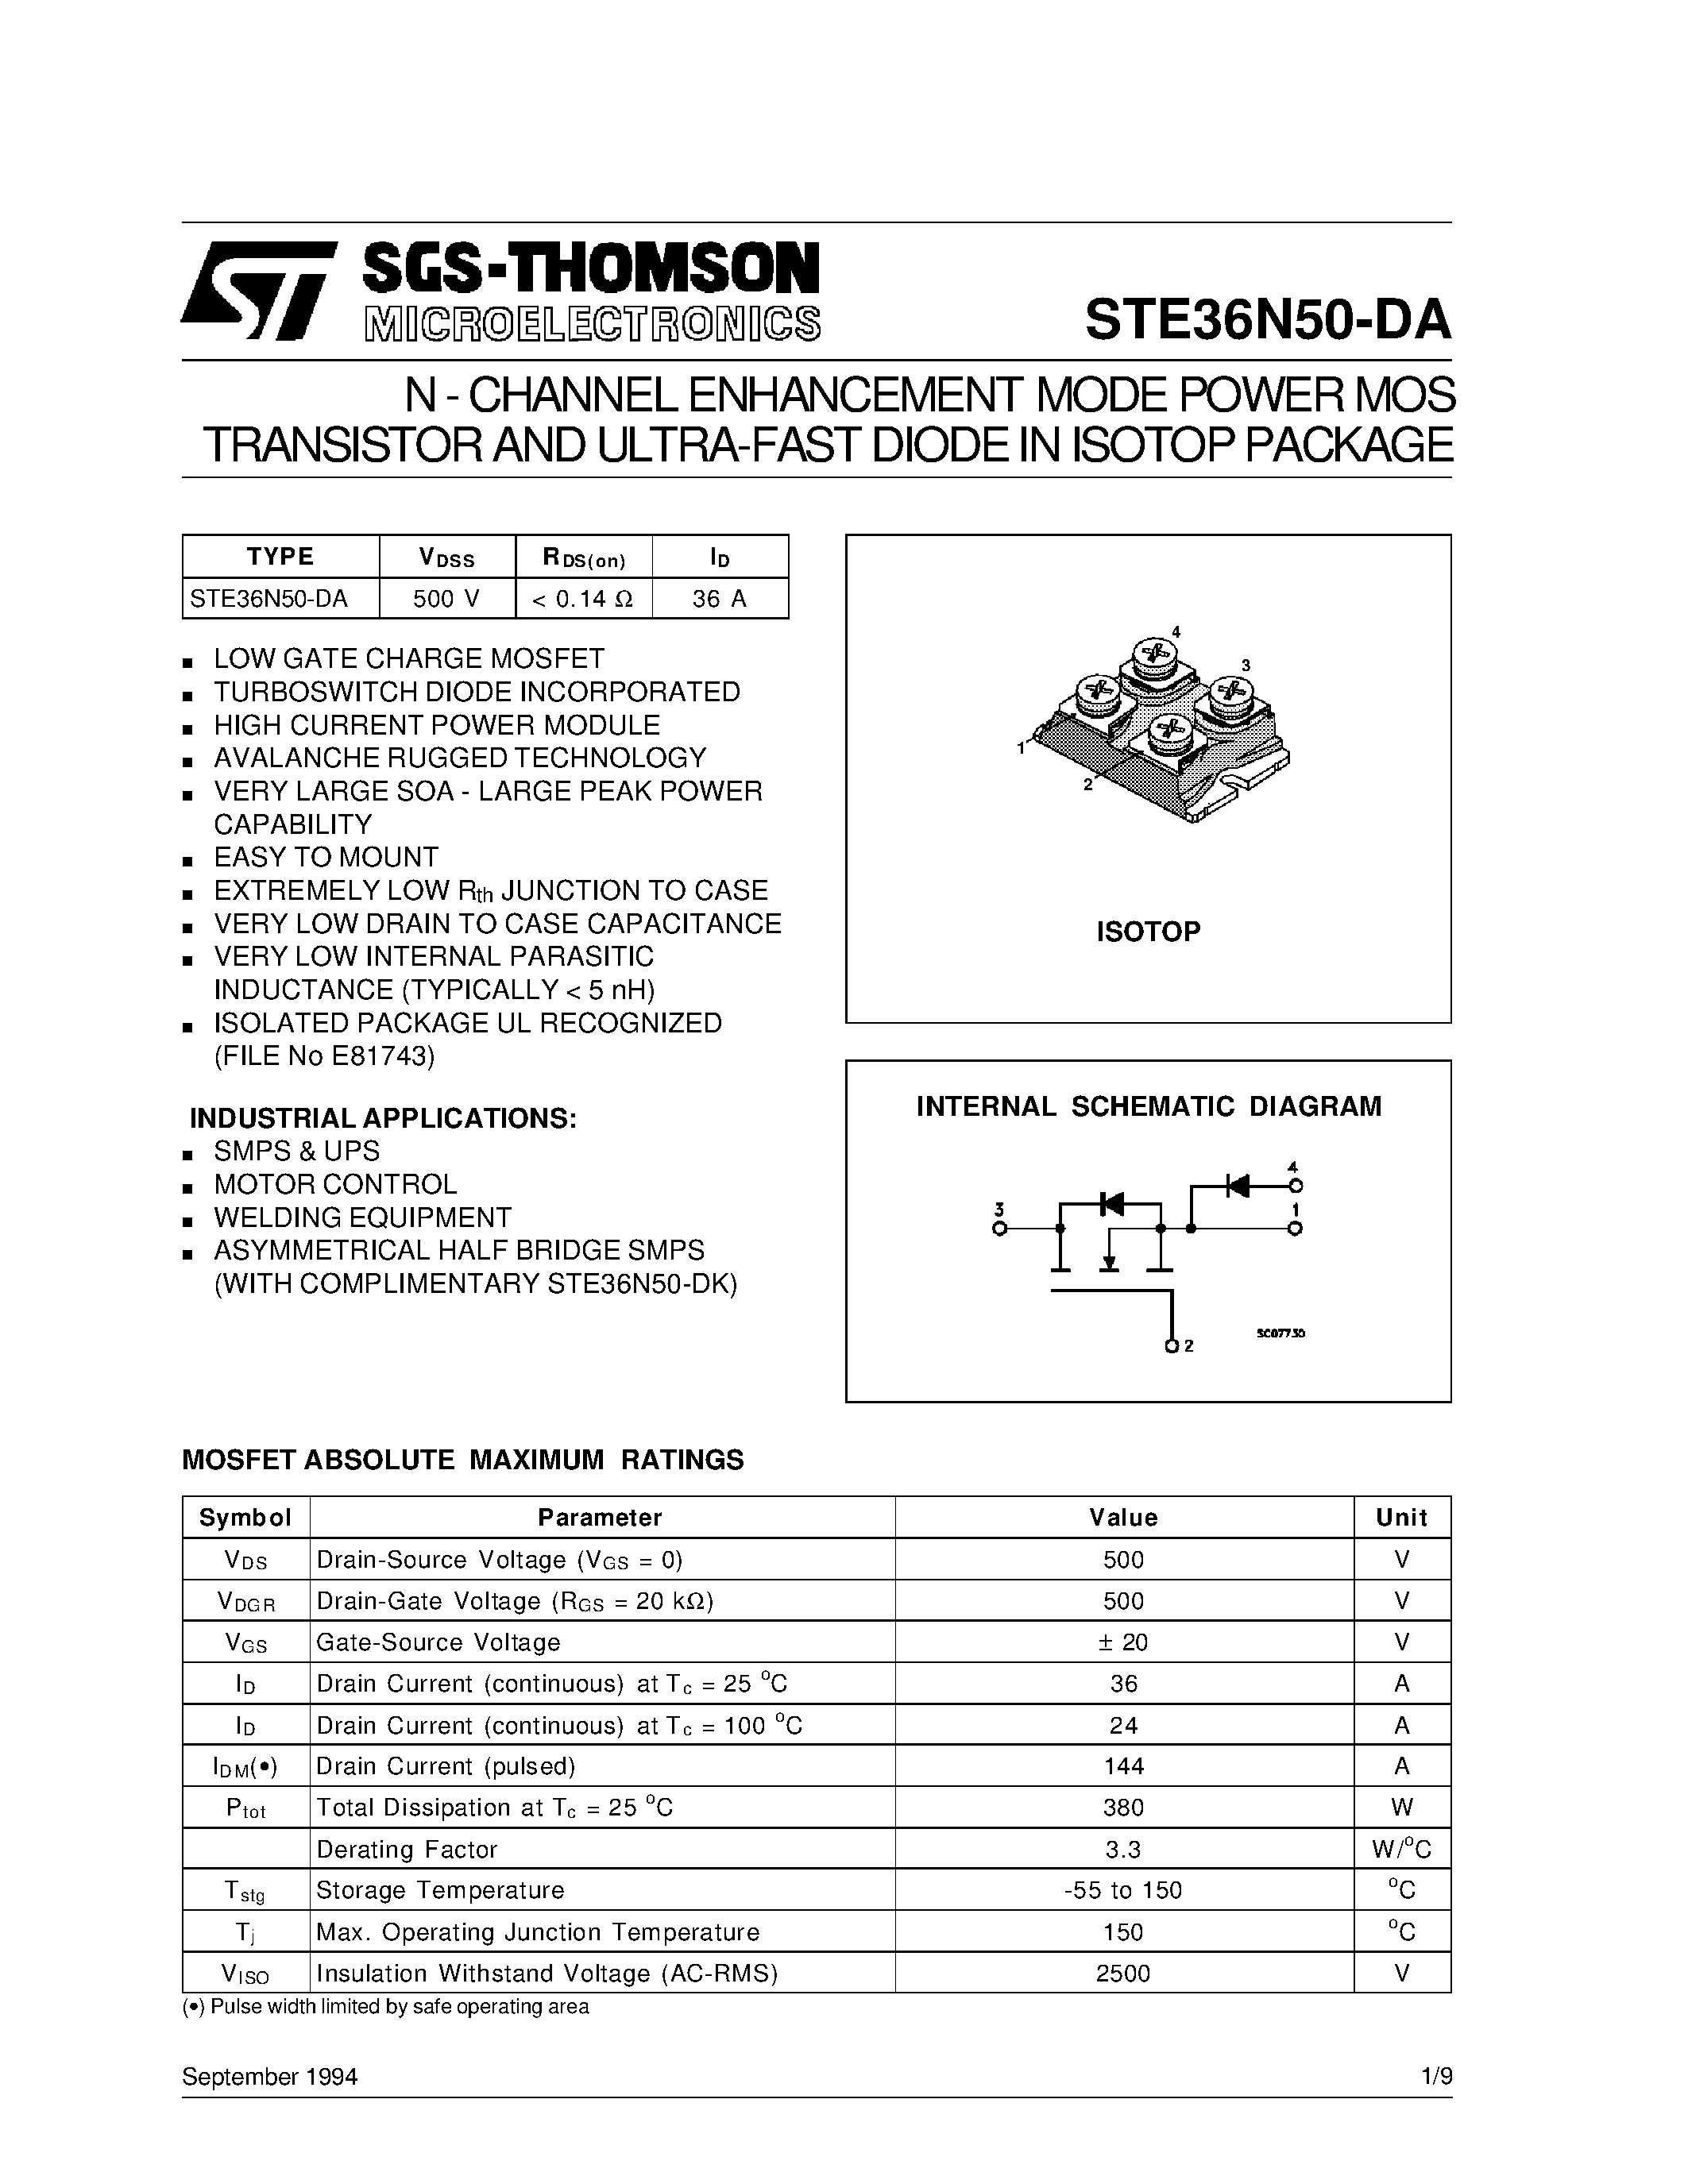 Datasheet STE36N50-DA - N-Channel Enhancement Mode Power MOS Transistor and Ultra-Fast Diode in Isotop Package page 1